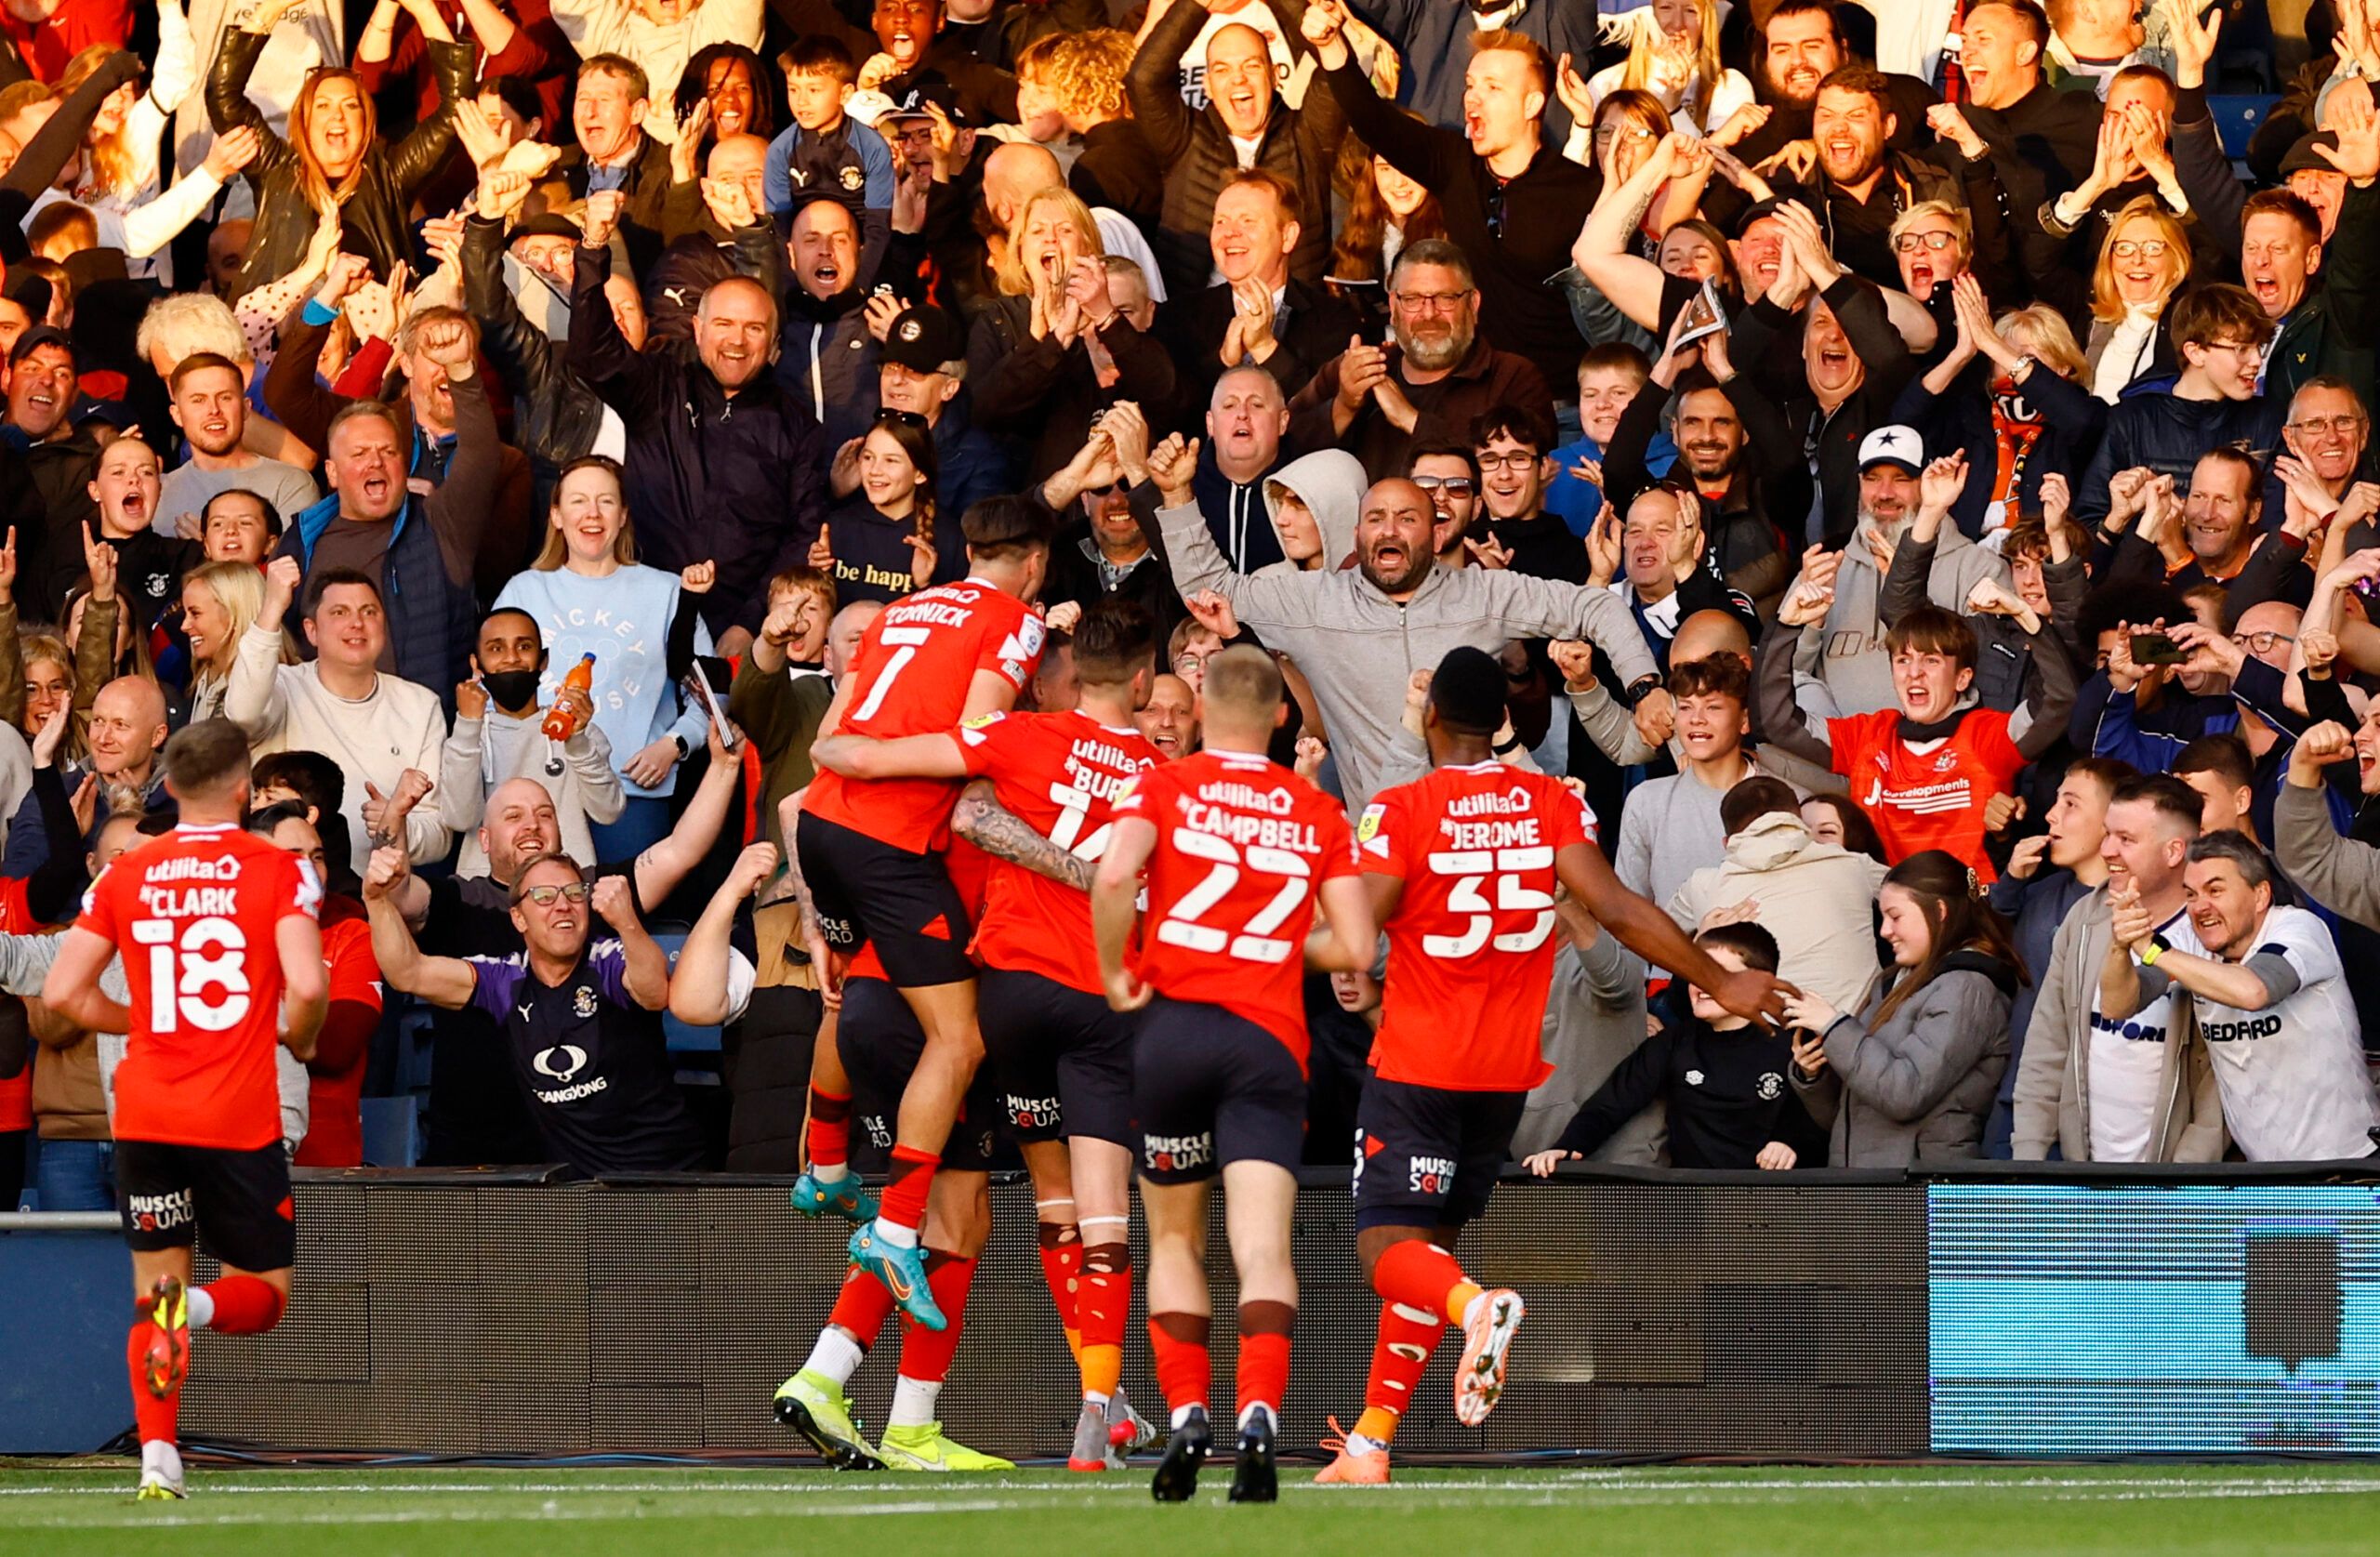 Soccer Football - Championship Play-Offs First Leg - Luton Town vs Huddersfield Town - Kenilworth Road, Luton, Britain - May 13, 2022 Luton Town's Sonny Bradley celebrates scoring their first goal Action Images/Andrew Boyers EDITORIAL USE ONLY. No use with unauthorized audio, video, data, fixture lists, club/league logos or 'live' services. Online in-match use limited to 75 images, no video emulation. No use in betting, games or single club /league/player publications.  Please contact your accou